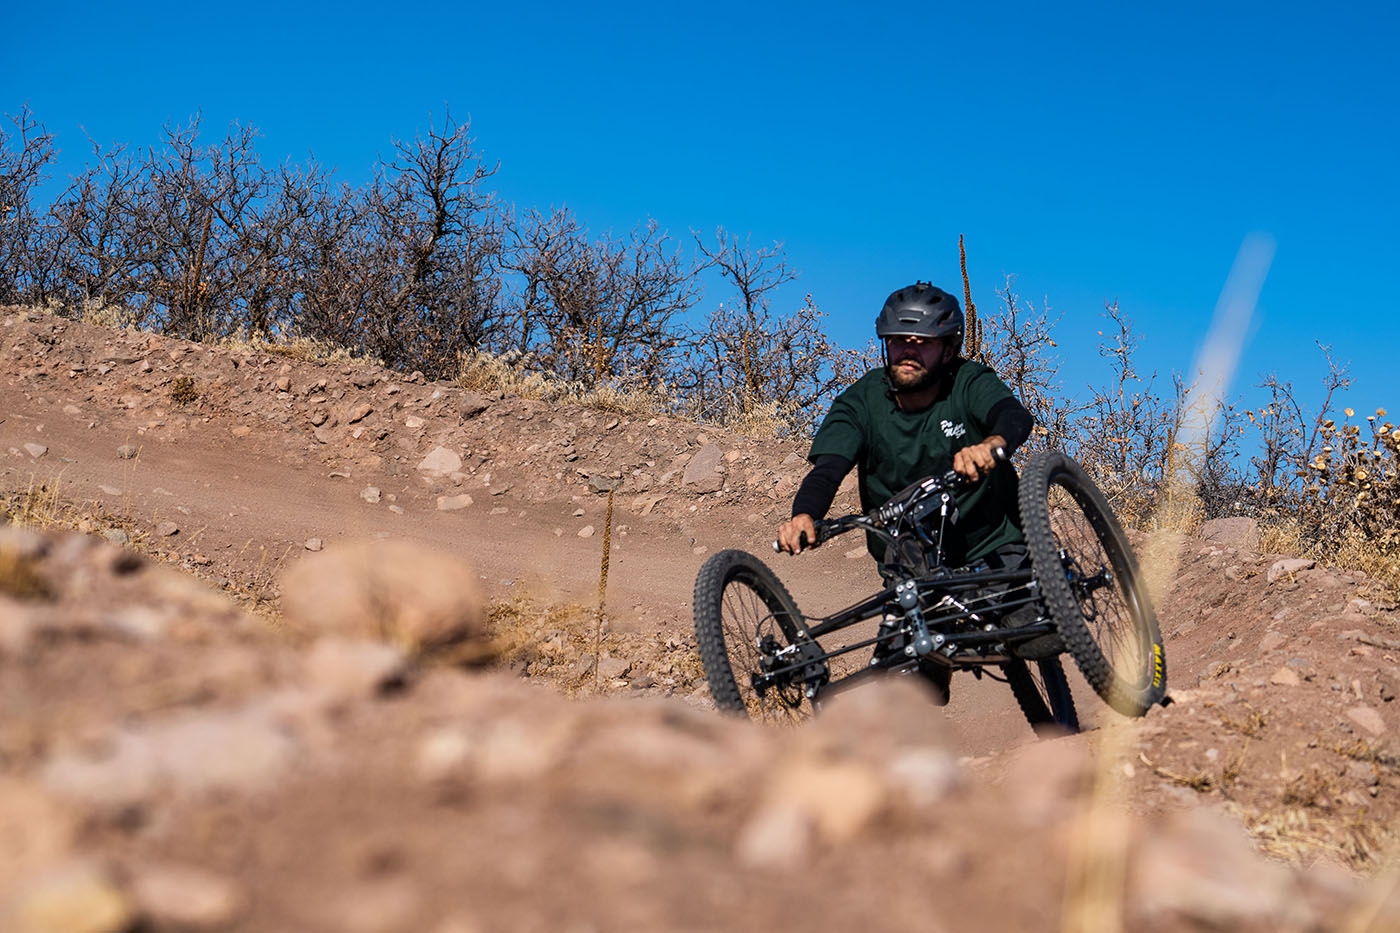 Wasatch Adaptive Sports has both indoor and outdoor cycling classes that become active seasonally, with outdoor beginning in the spring and indoor beginning in the fall.